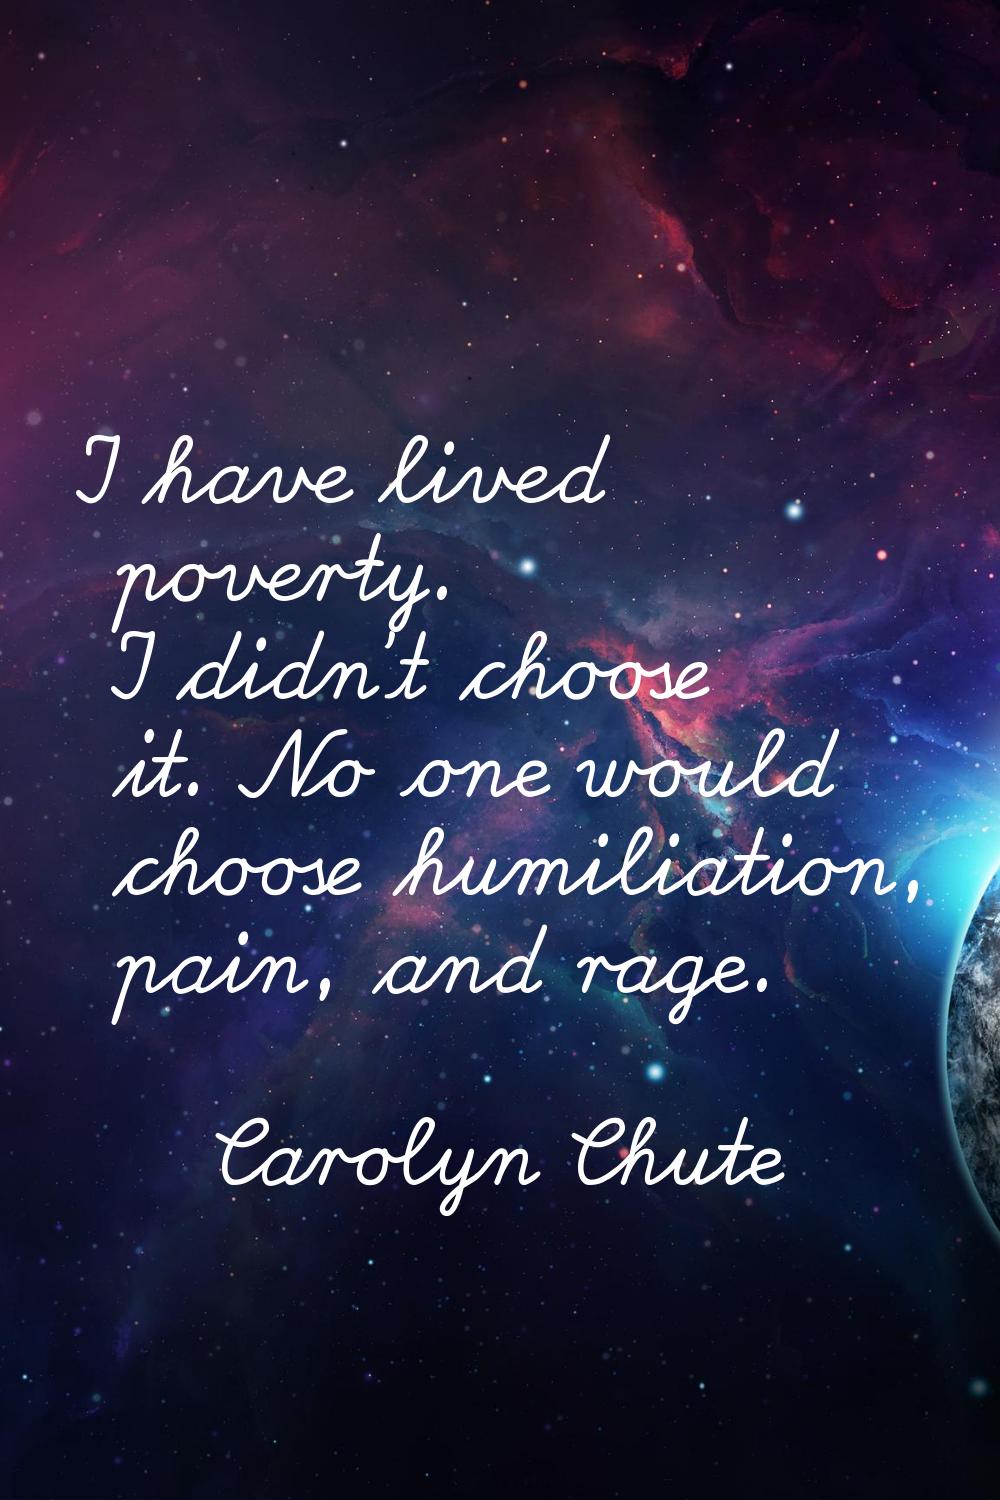 I have lived poverty. I didn't choose it. No one would choose humiliation, pain, and rage.